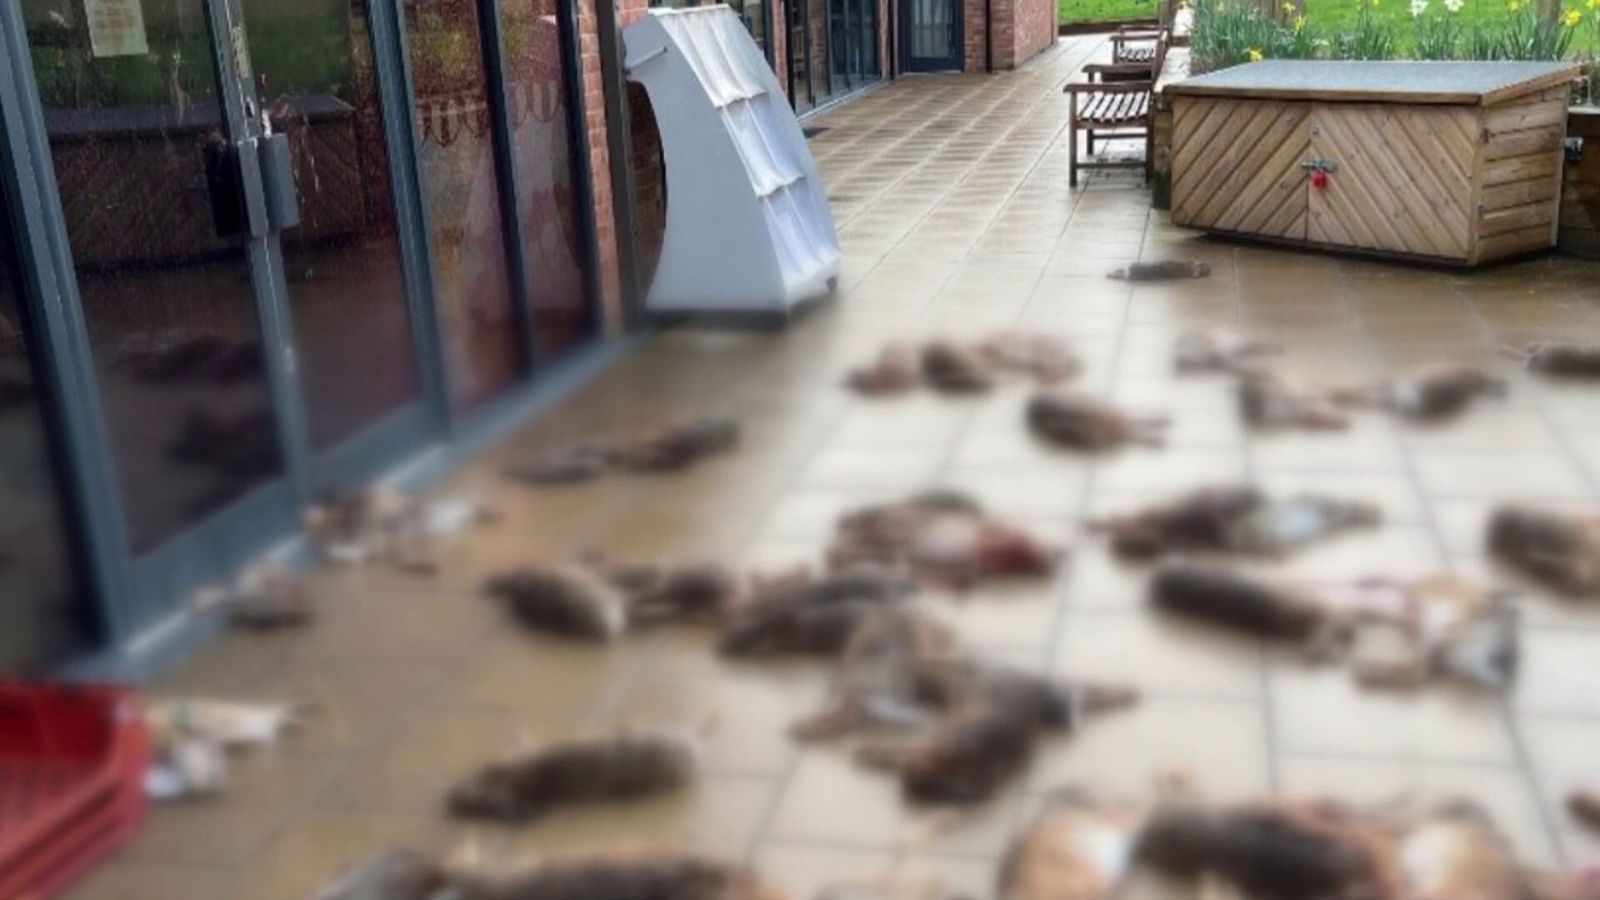 Hampshire: Police investigating after dozens of dead animals dumped outside shop